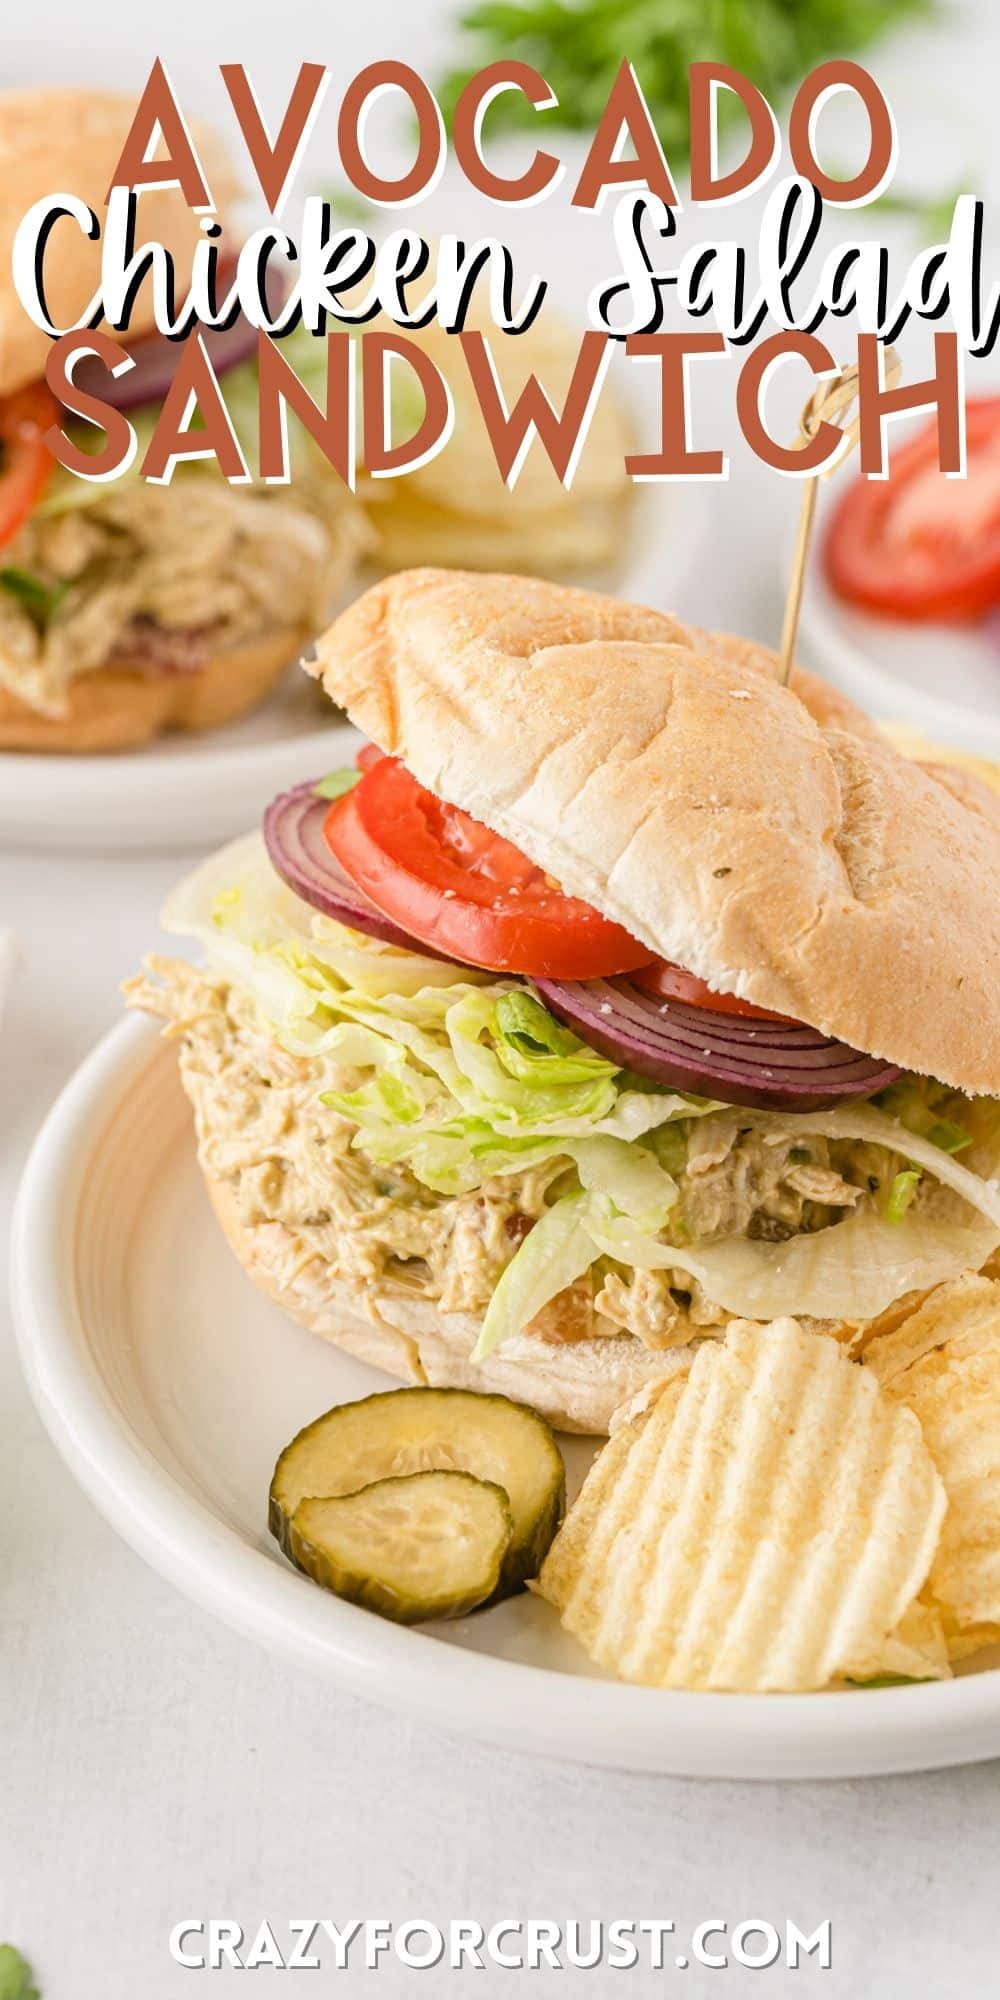 sandwich with lettuce tomatoes and chicken on a white plate with words on the image.